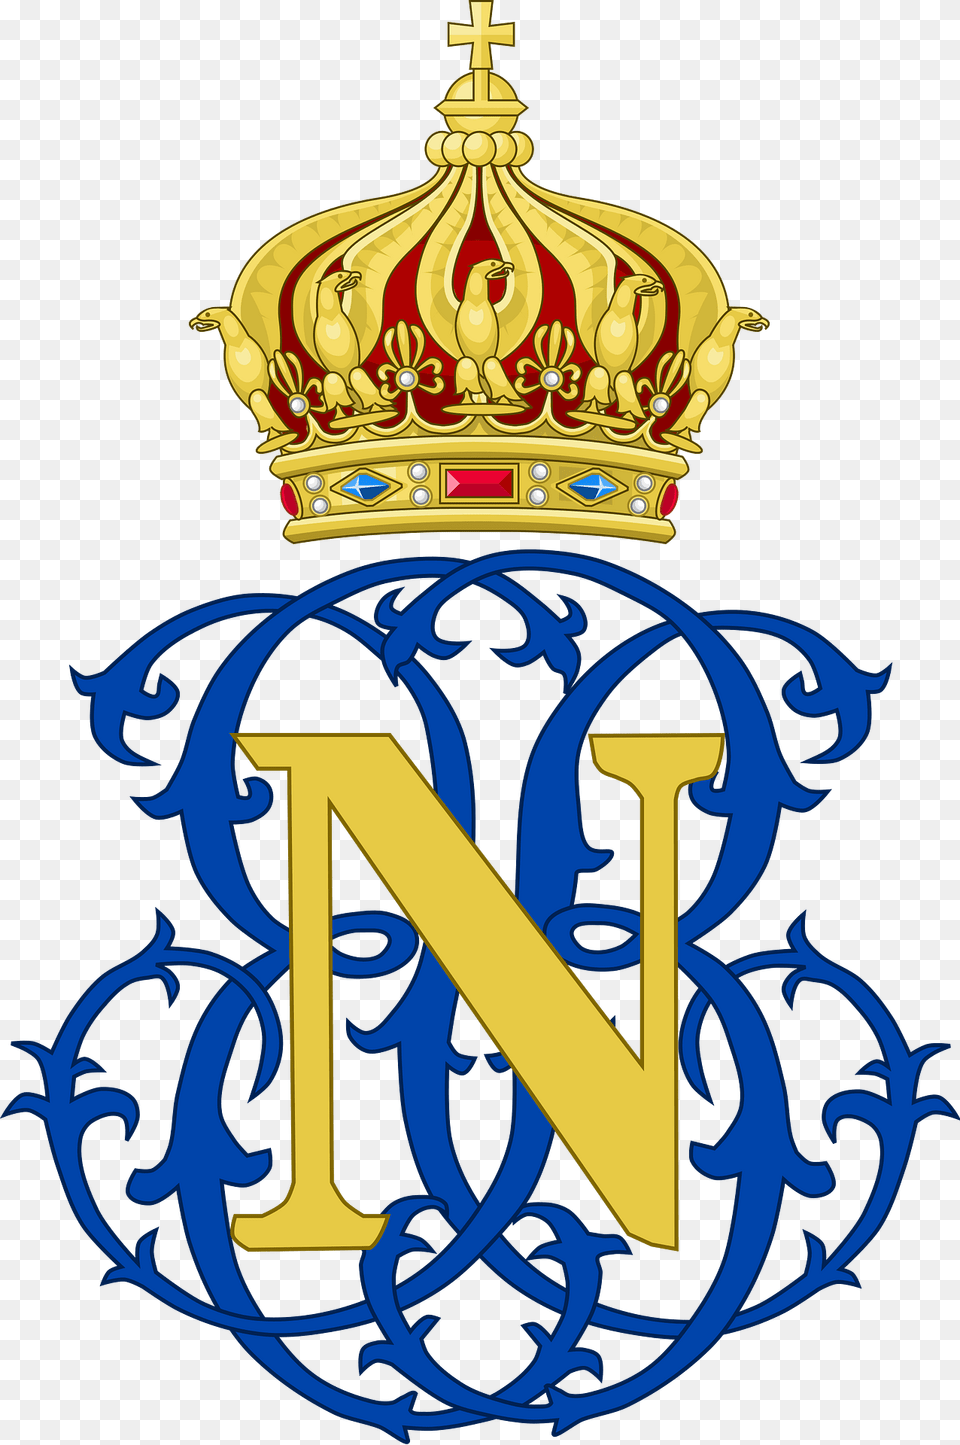 Imperial Monogram Of Napoleon Prince Imperial Of France Clipart, Accessories, Jewelry, Crown, Symbol Png